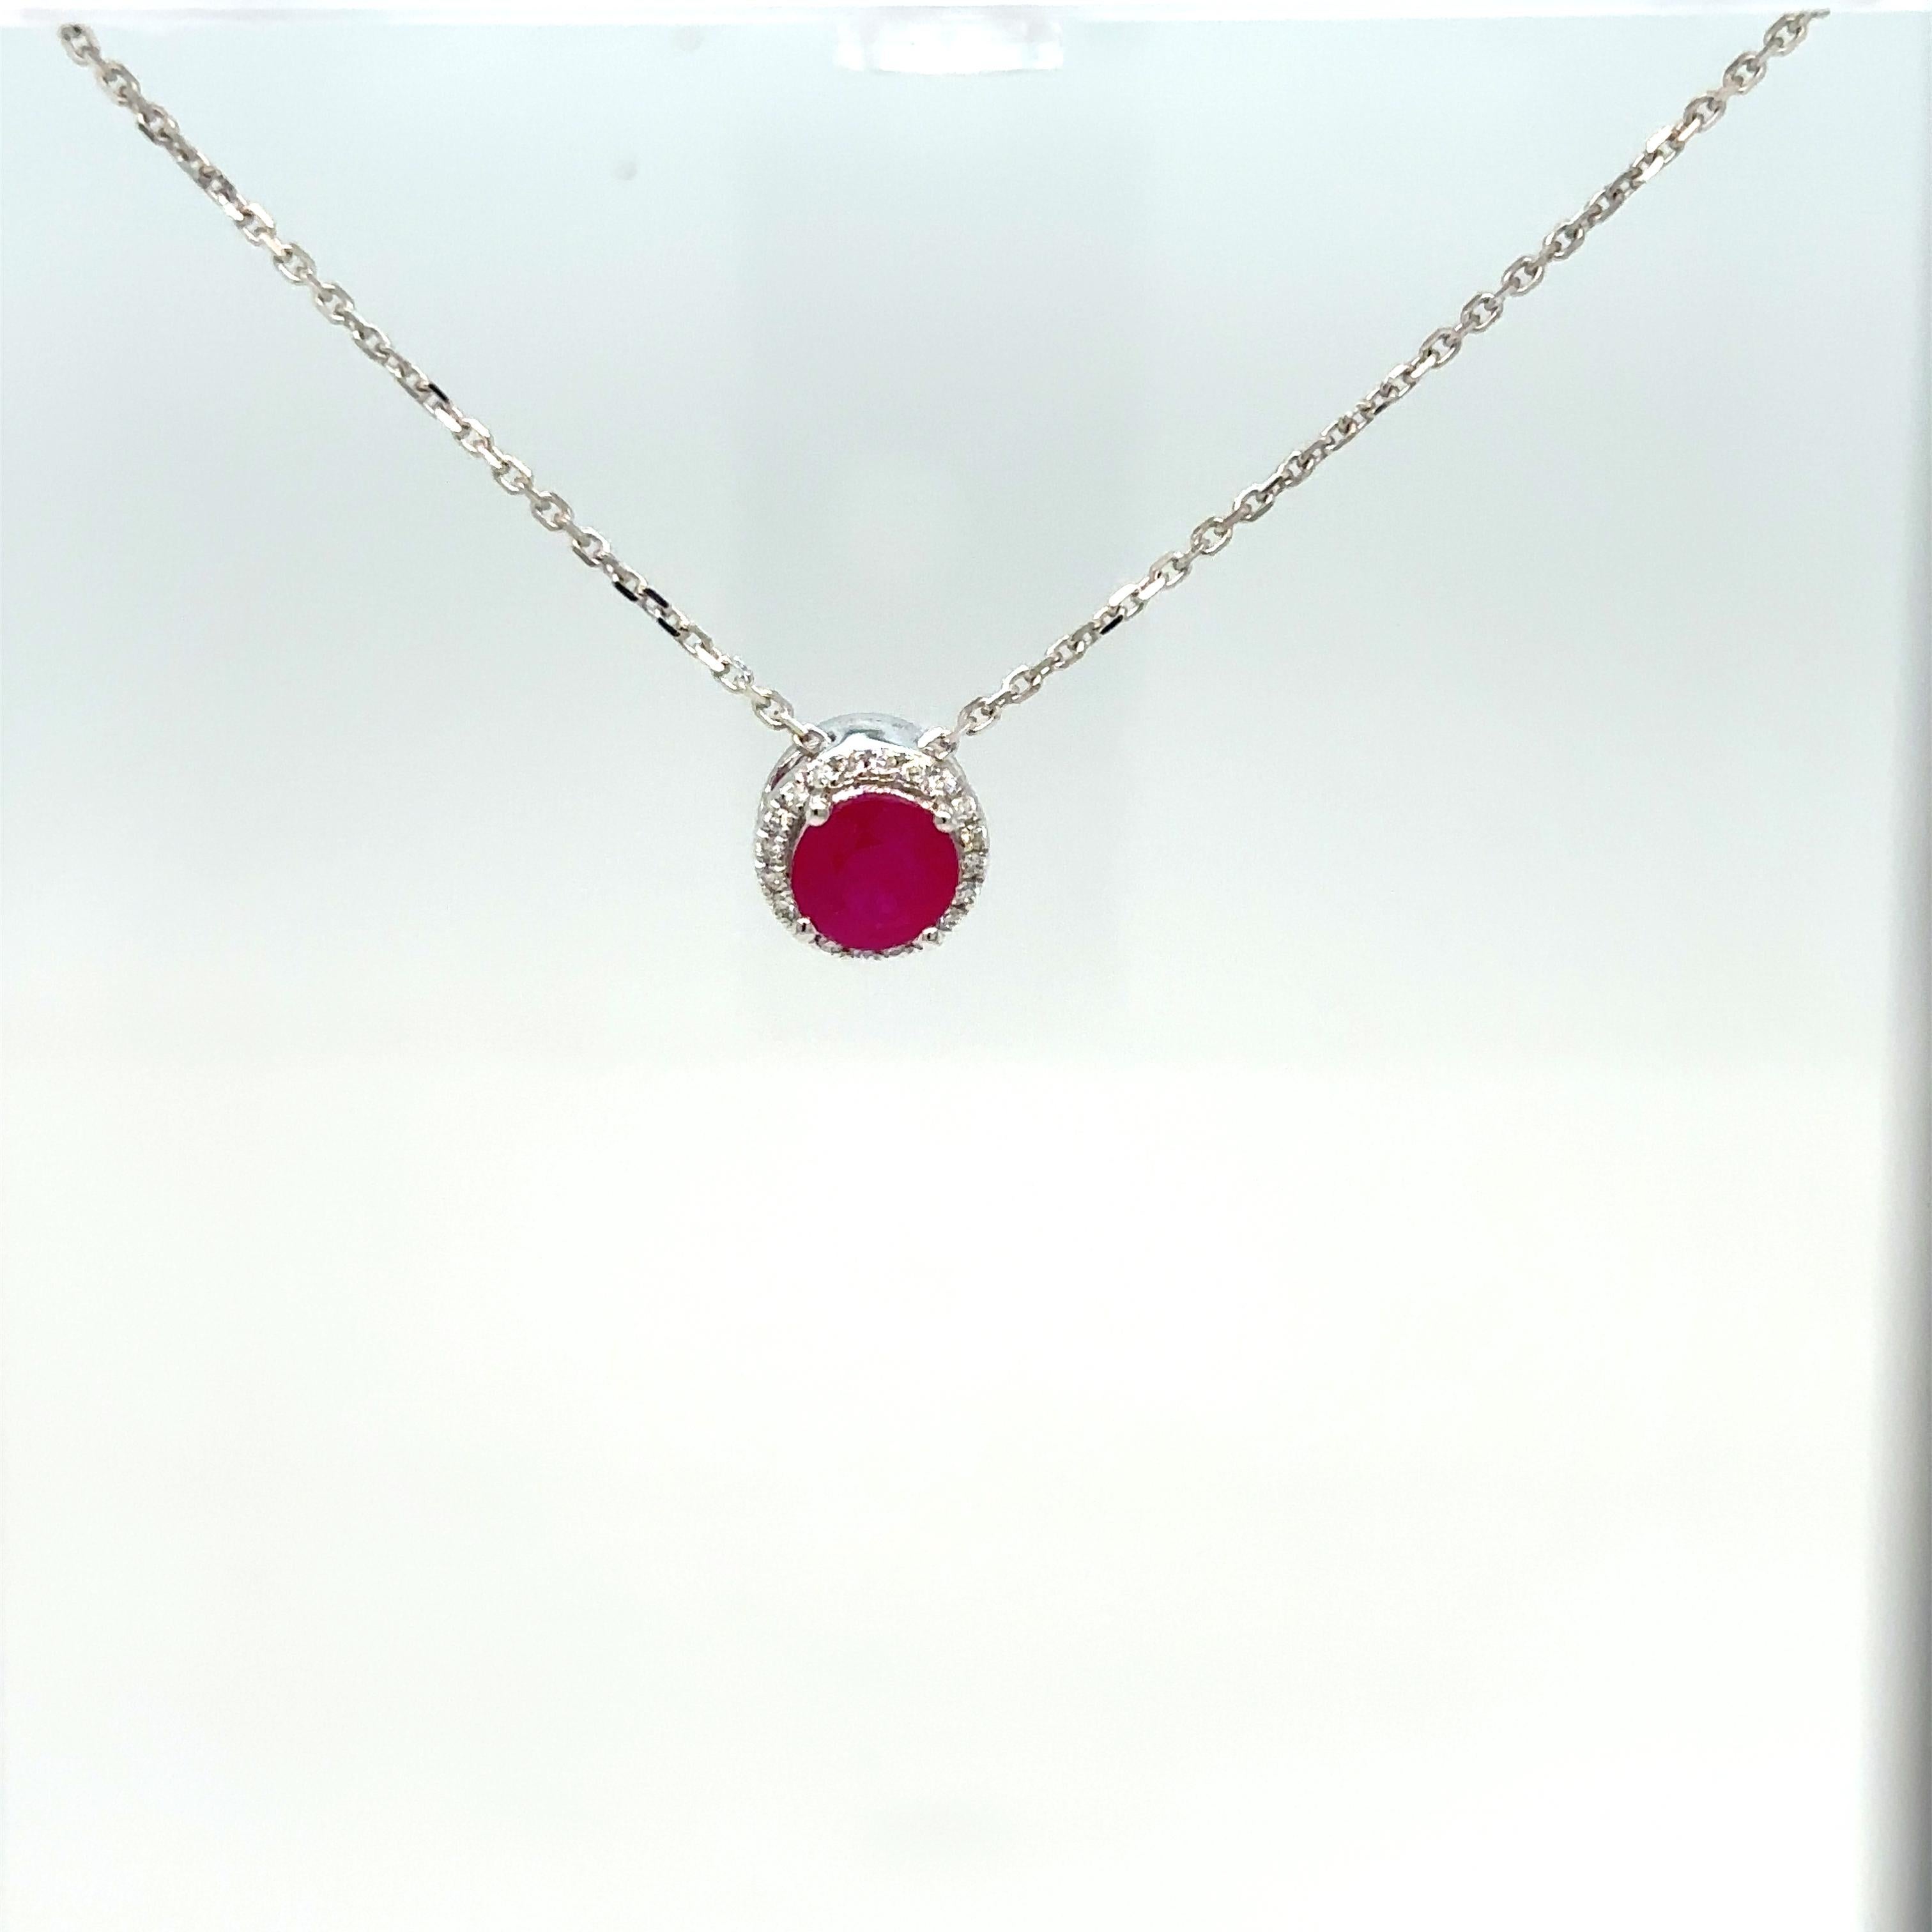 Elegant Ruby pendant in Round shape bounded by Round diamonds on 360 degrees.

Secure Yours Today: Limited stock available. Don't miss the chance to secure your Ruby Diamond Pendant today. It's not just a pendant; it's a way of fashion.

Product